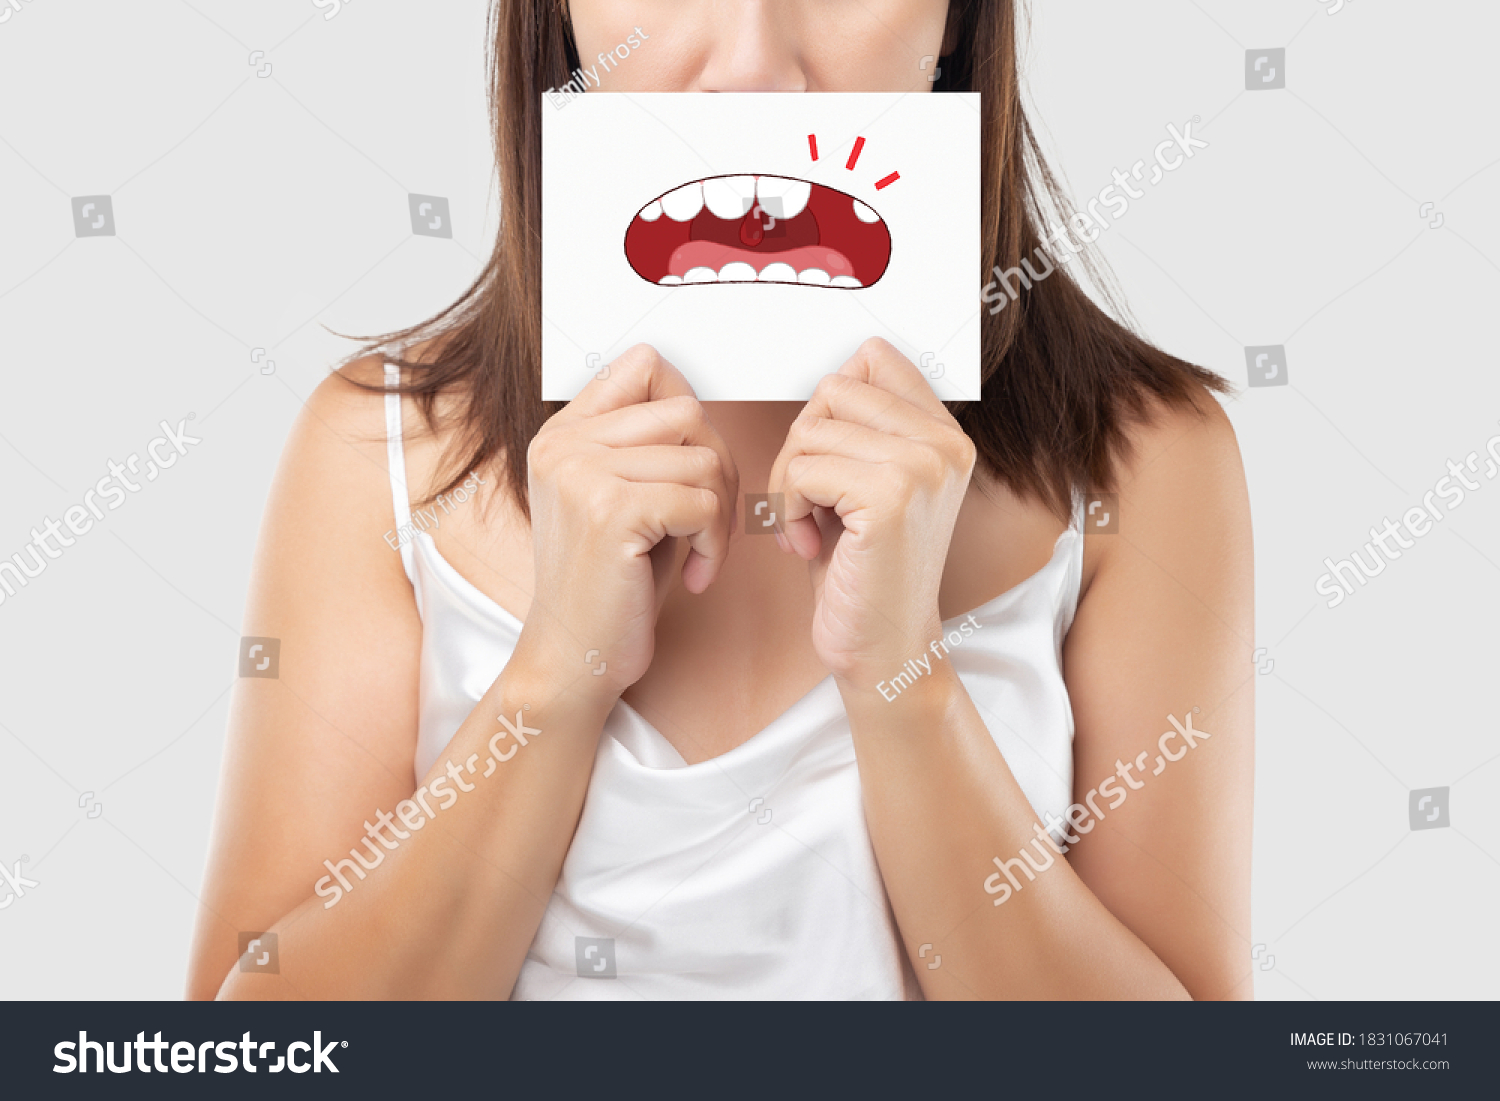 Asian woman in the white wear holding a white paper with the broken tooth cartoon picture of his mouth against the gray background, Decayed tooth, The concept with healthcare gums and teeth #1831067041